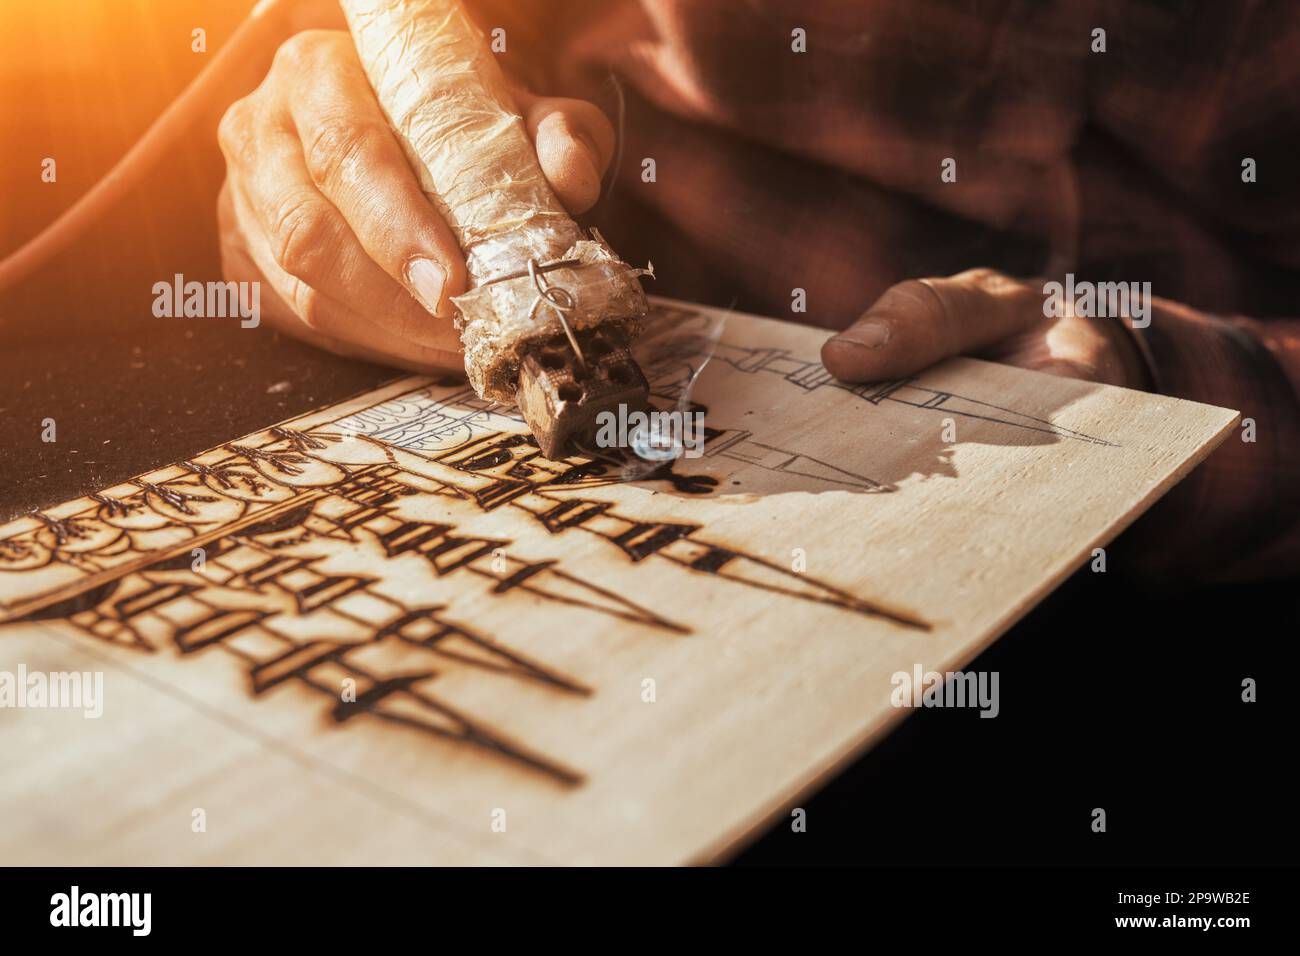 An artist using a pyrography tool to create a pyrogravure. Wood burning with pyrography pen. Stock Photo